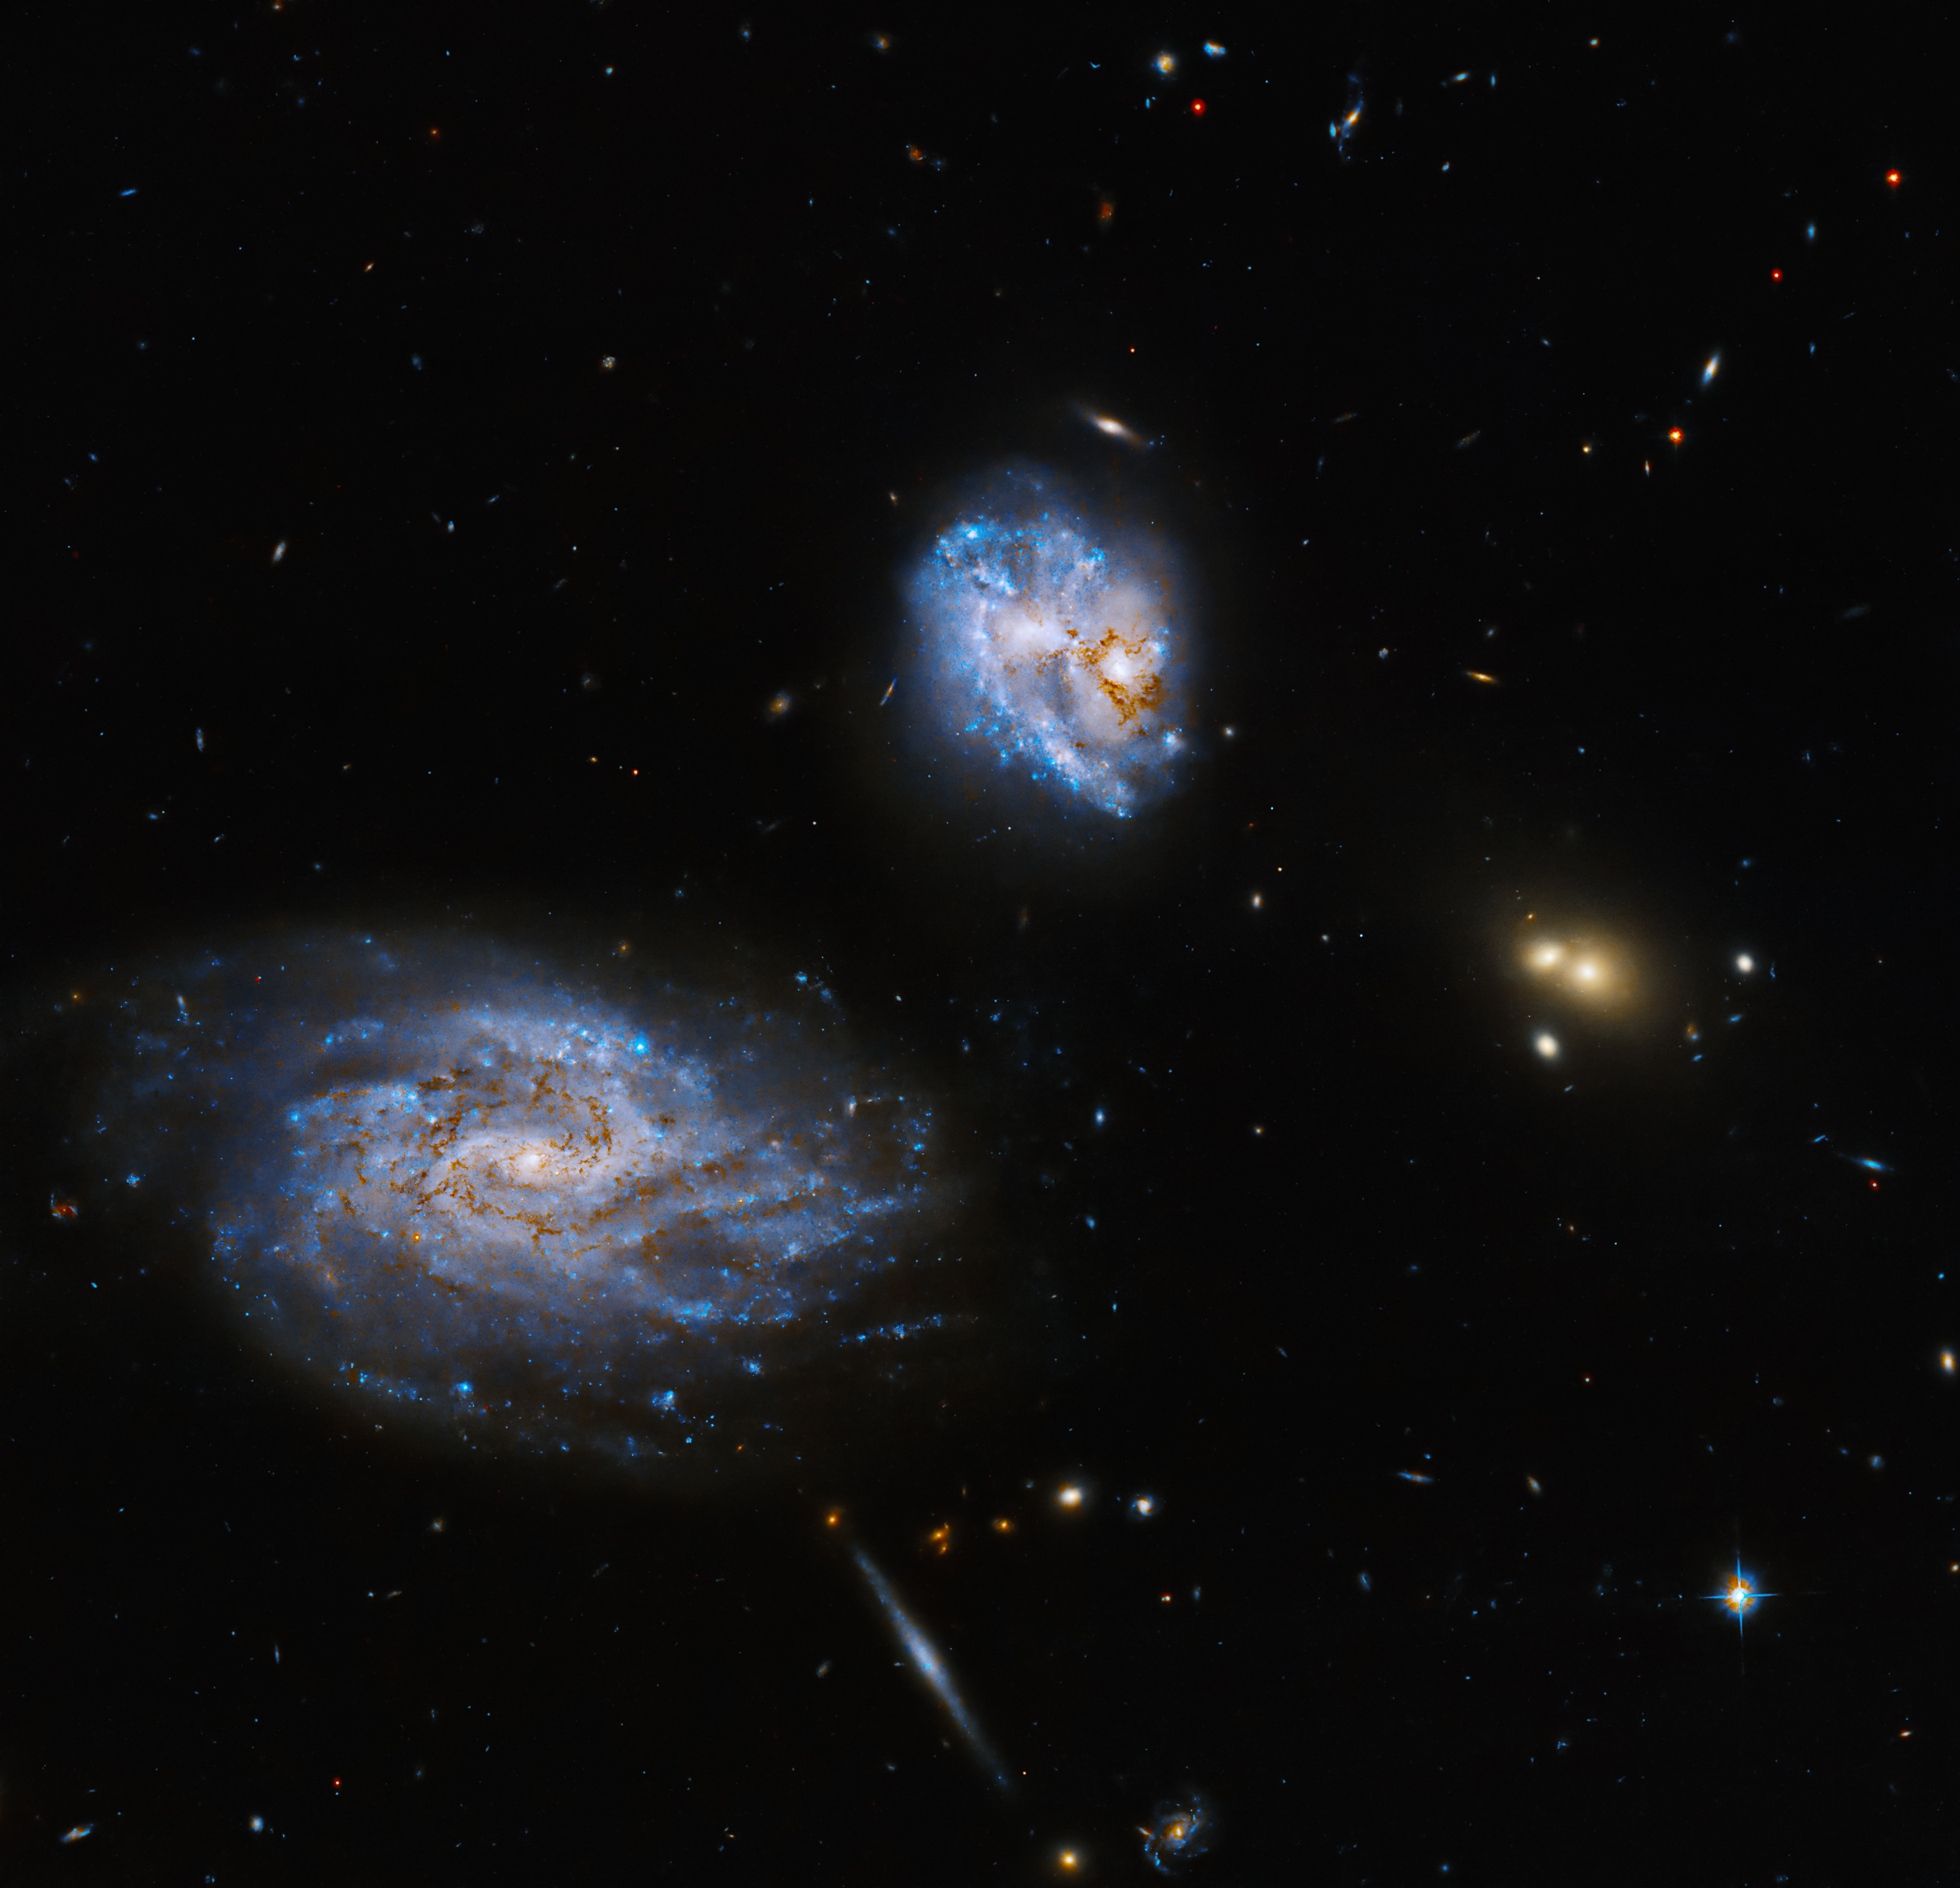 Near the top center of the image, a galaxy full of bright blue stars shines. To its lower left is a spiral galaxy, also full of blue stars and dark brown dust. Other distant galaxies and stars fill the black background of space.